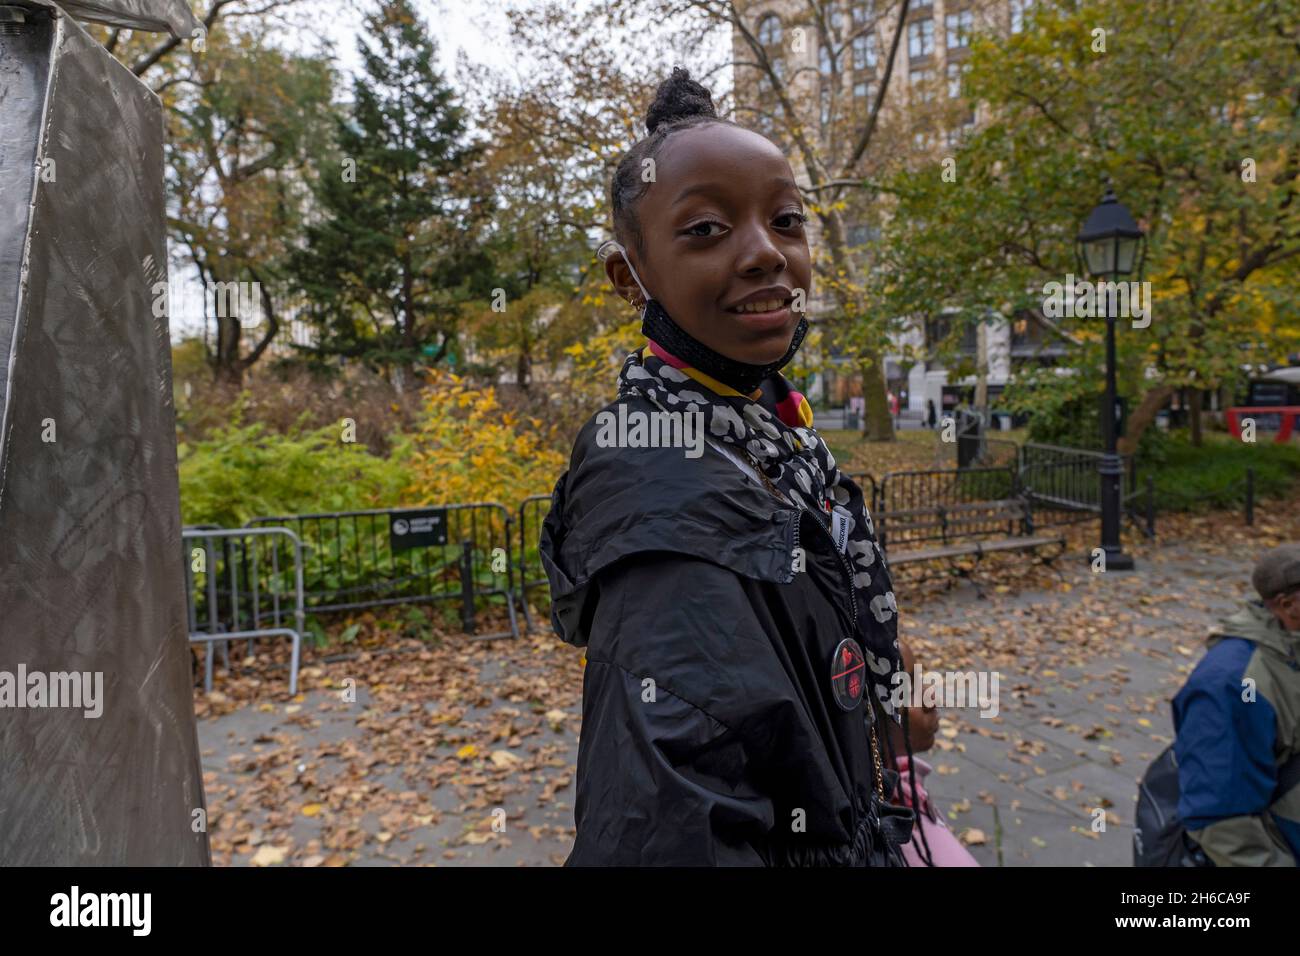 NEW YORK, NY - NOVEMBER 14: Serenity, age 10, attends a rally at City Hall Park on November 14, 2021 in New York City.   Activists against gun violence staged a rally in support of mayor-elect Eric Adams, who was threatened by New York BLM co-founder Hawk Newsome who vowed there'll be 'riots,' 'fire' and 'bloodshed' if mayor-elect Eric Adams follows through with his promise to bring back plainclothes anti-crime cops to battle New York's surge in violent crimes.   A coalition of Black and Brown community activists show solidarity with the mayor-elect Eric Adams and his plan to fight gun violenc Stock Photo